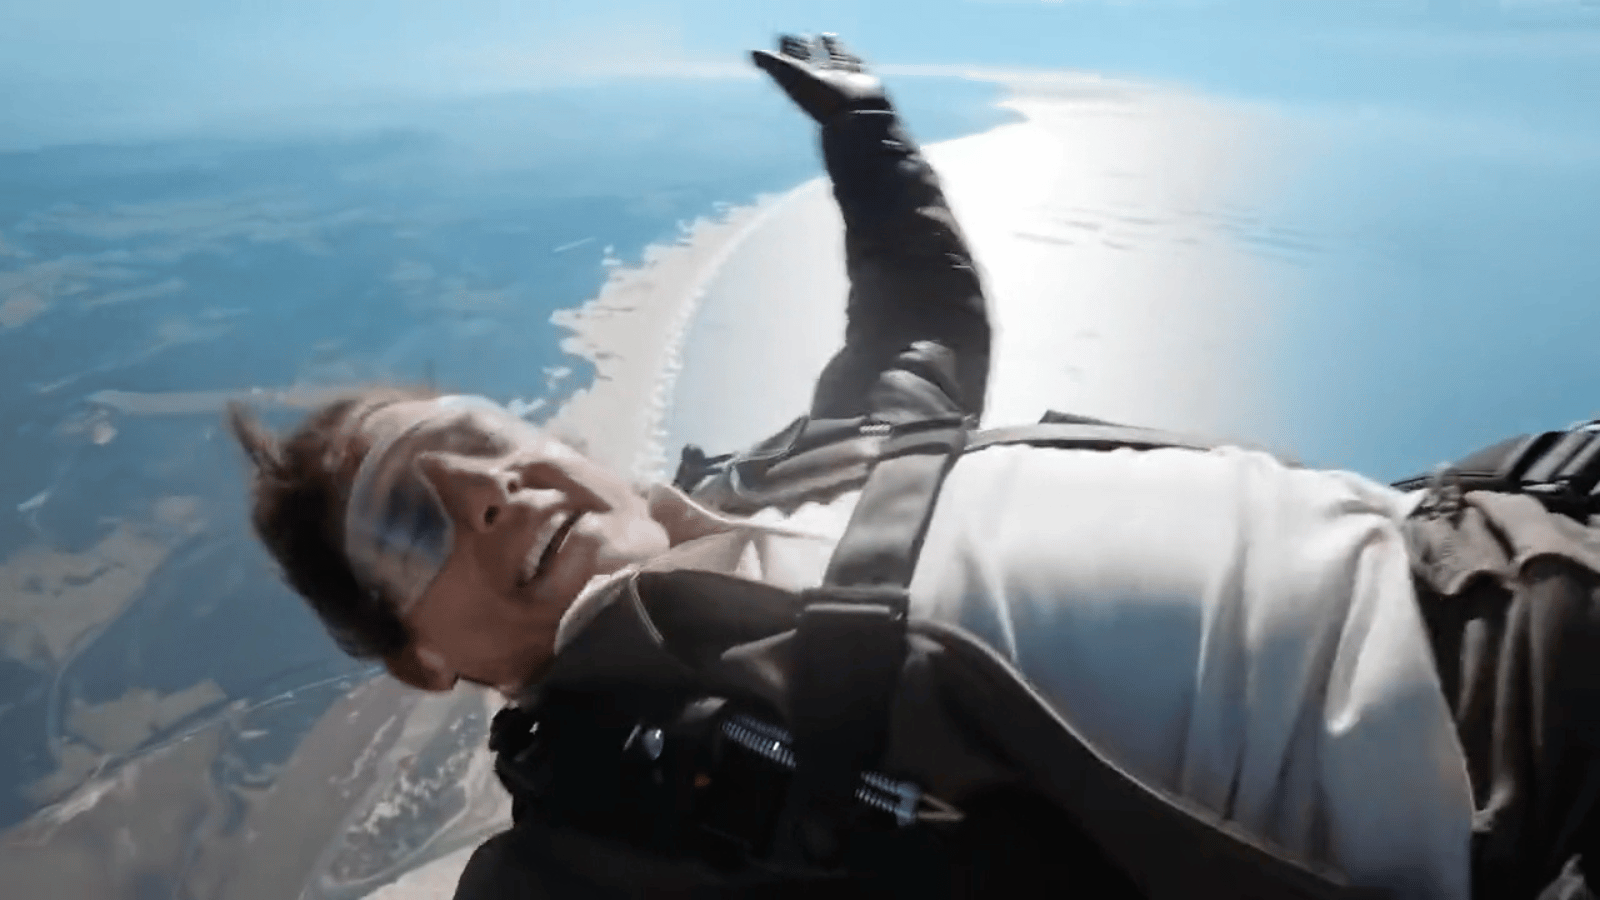 Tom Cruise Thanks Fans For Seeing ‘Top Gun Maverick’ While Skydiving